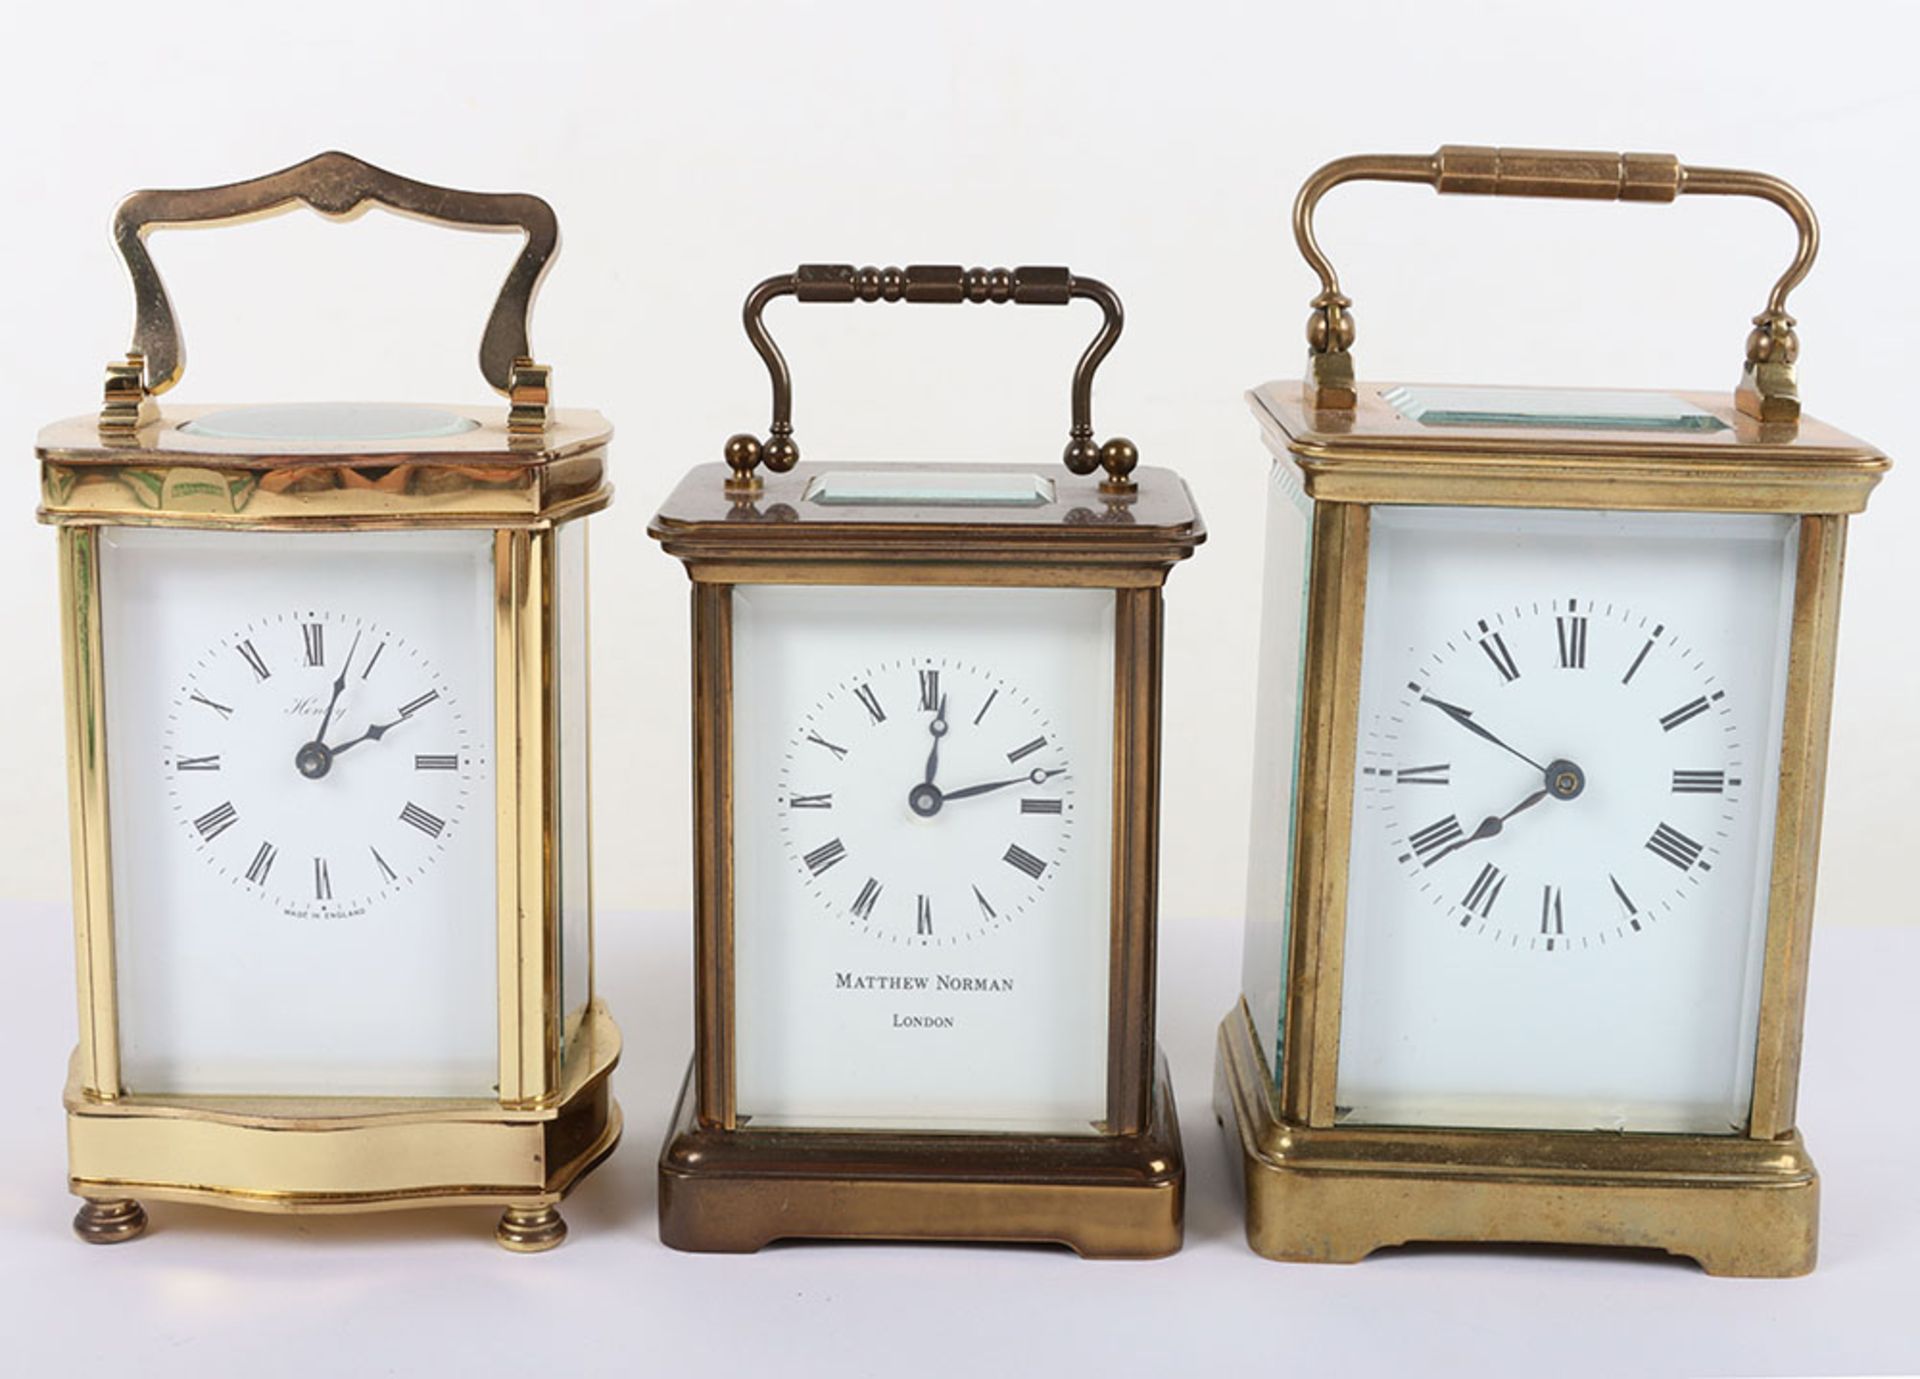 Three 20th century carriage clocks, including Henley, Matthew Norman and one other